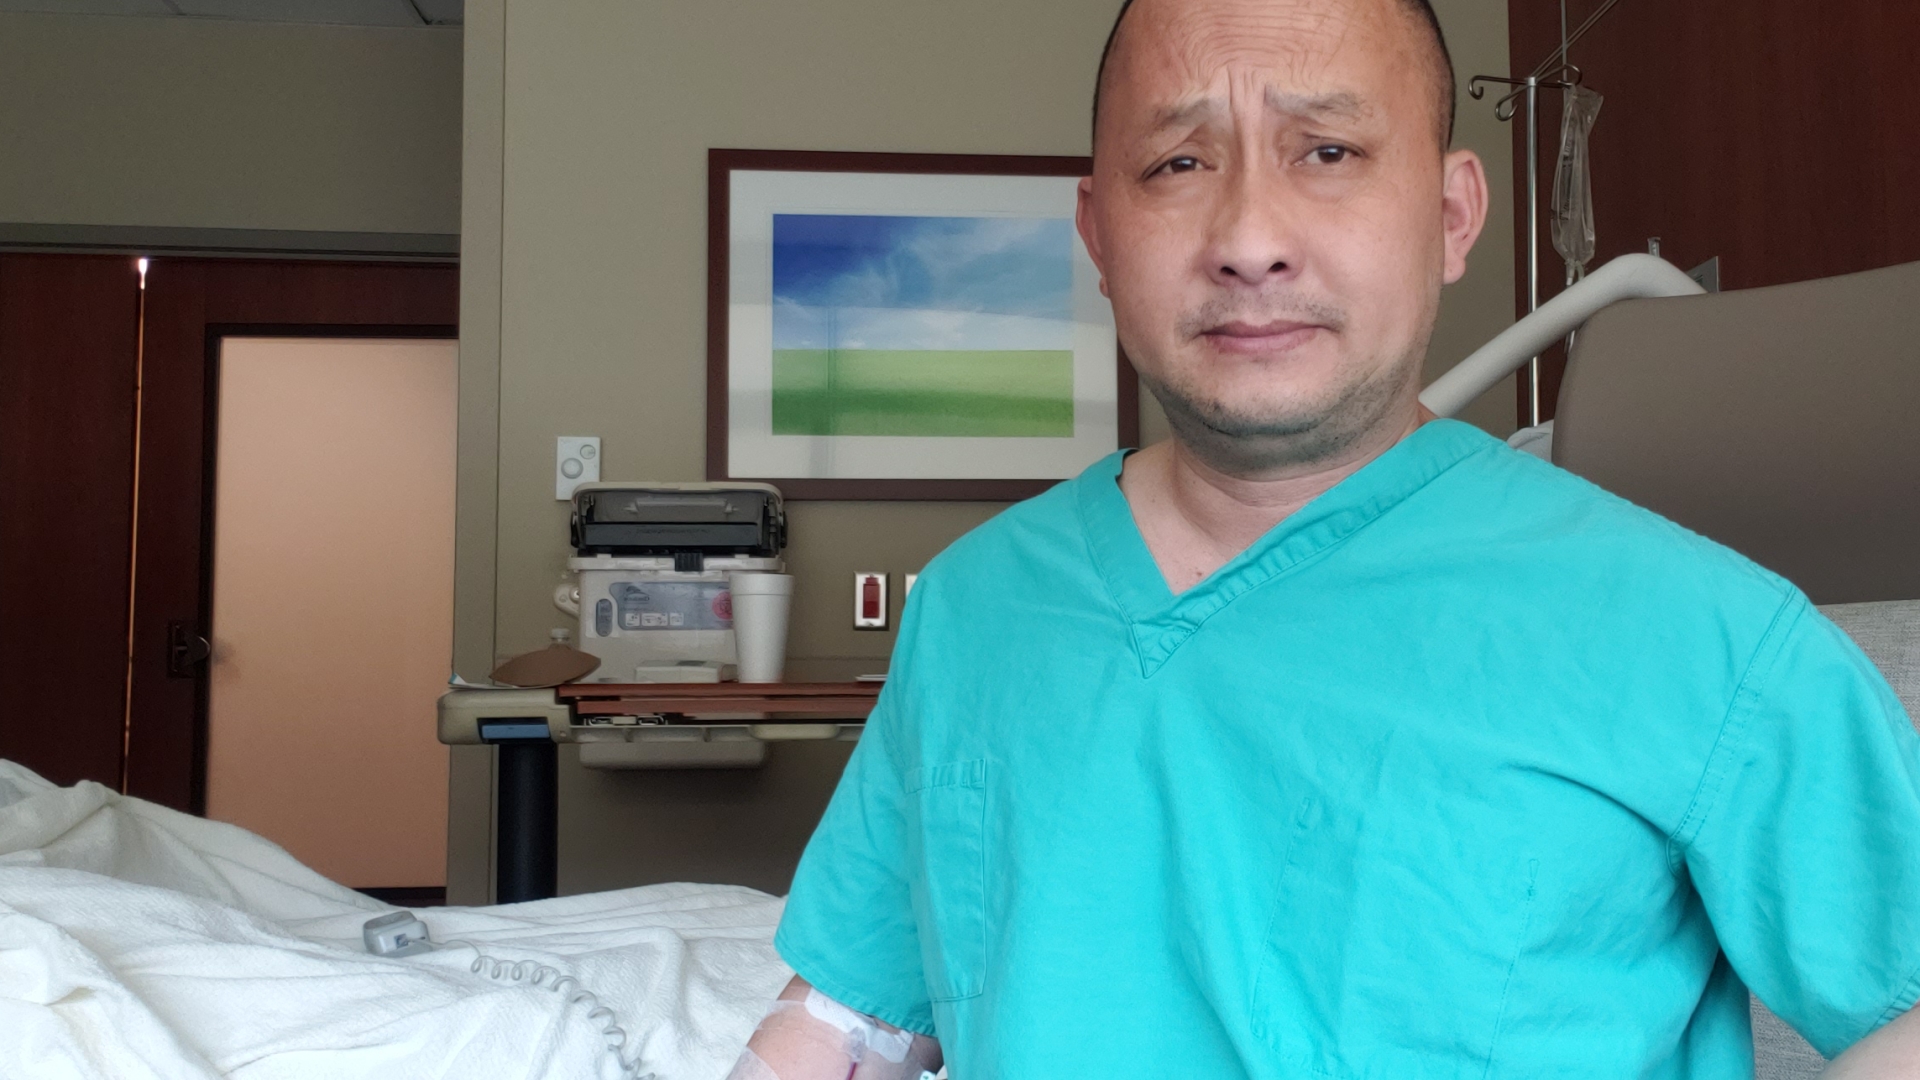 Nhia Ly was cooking at the restaurant he and his wife own when he experienced chest pain, nausea, sweating, and shaking. He knew something wasn’t right and headed to the closest emergency department, where he found out he was having a heart attack. 